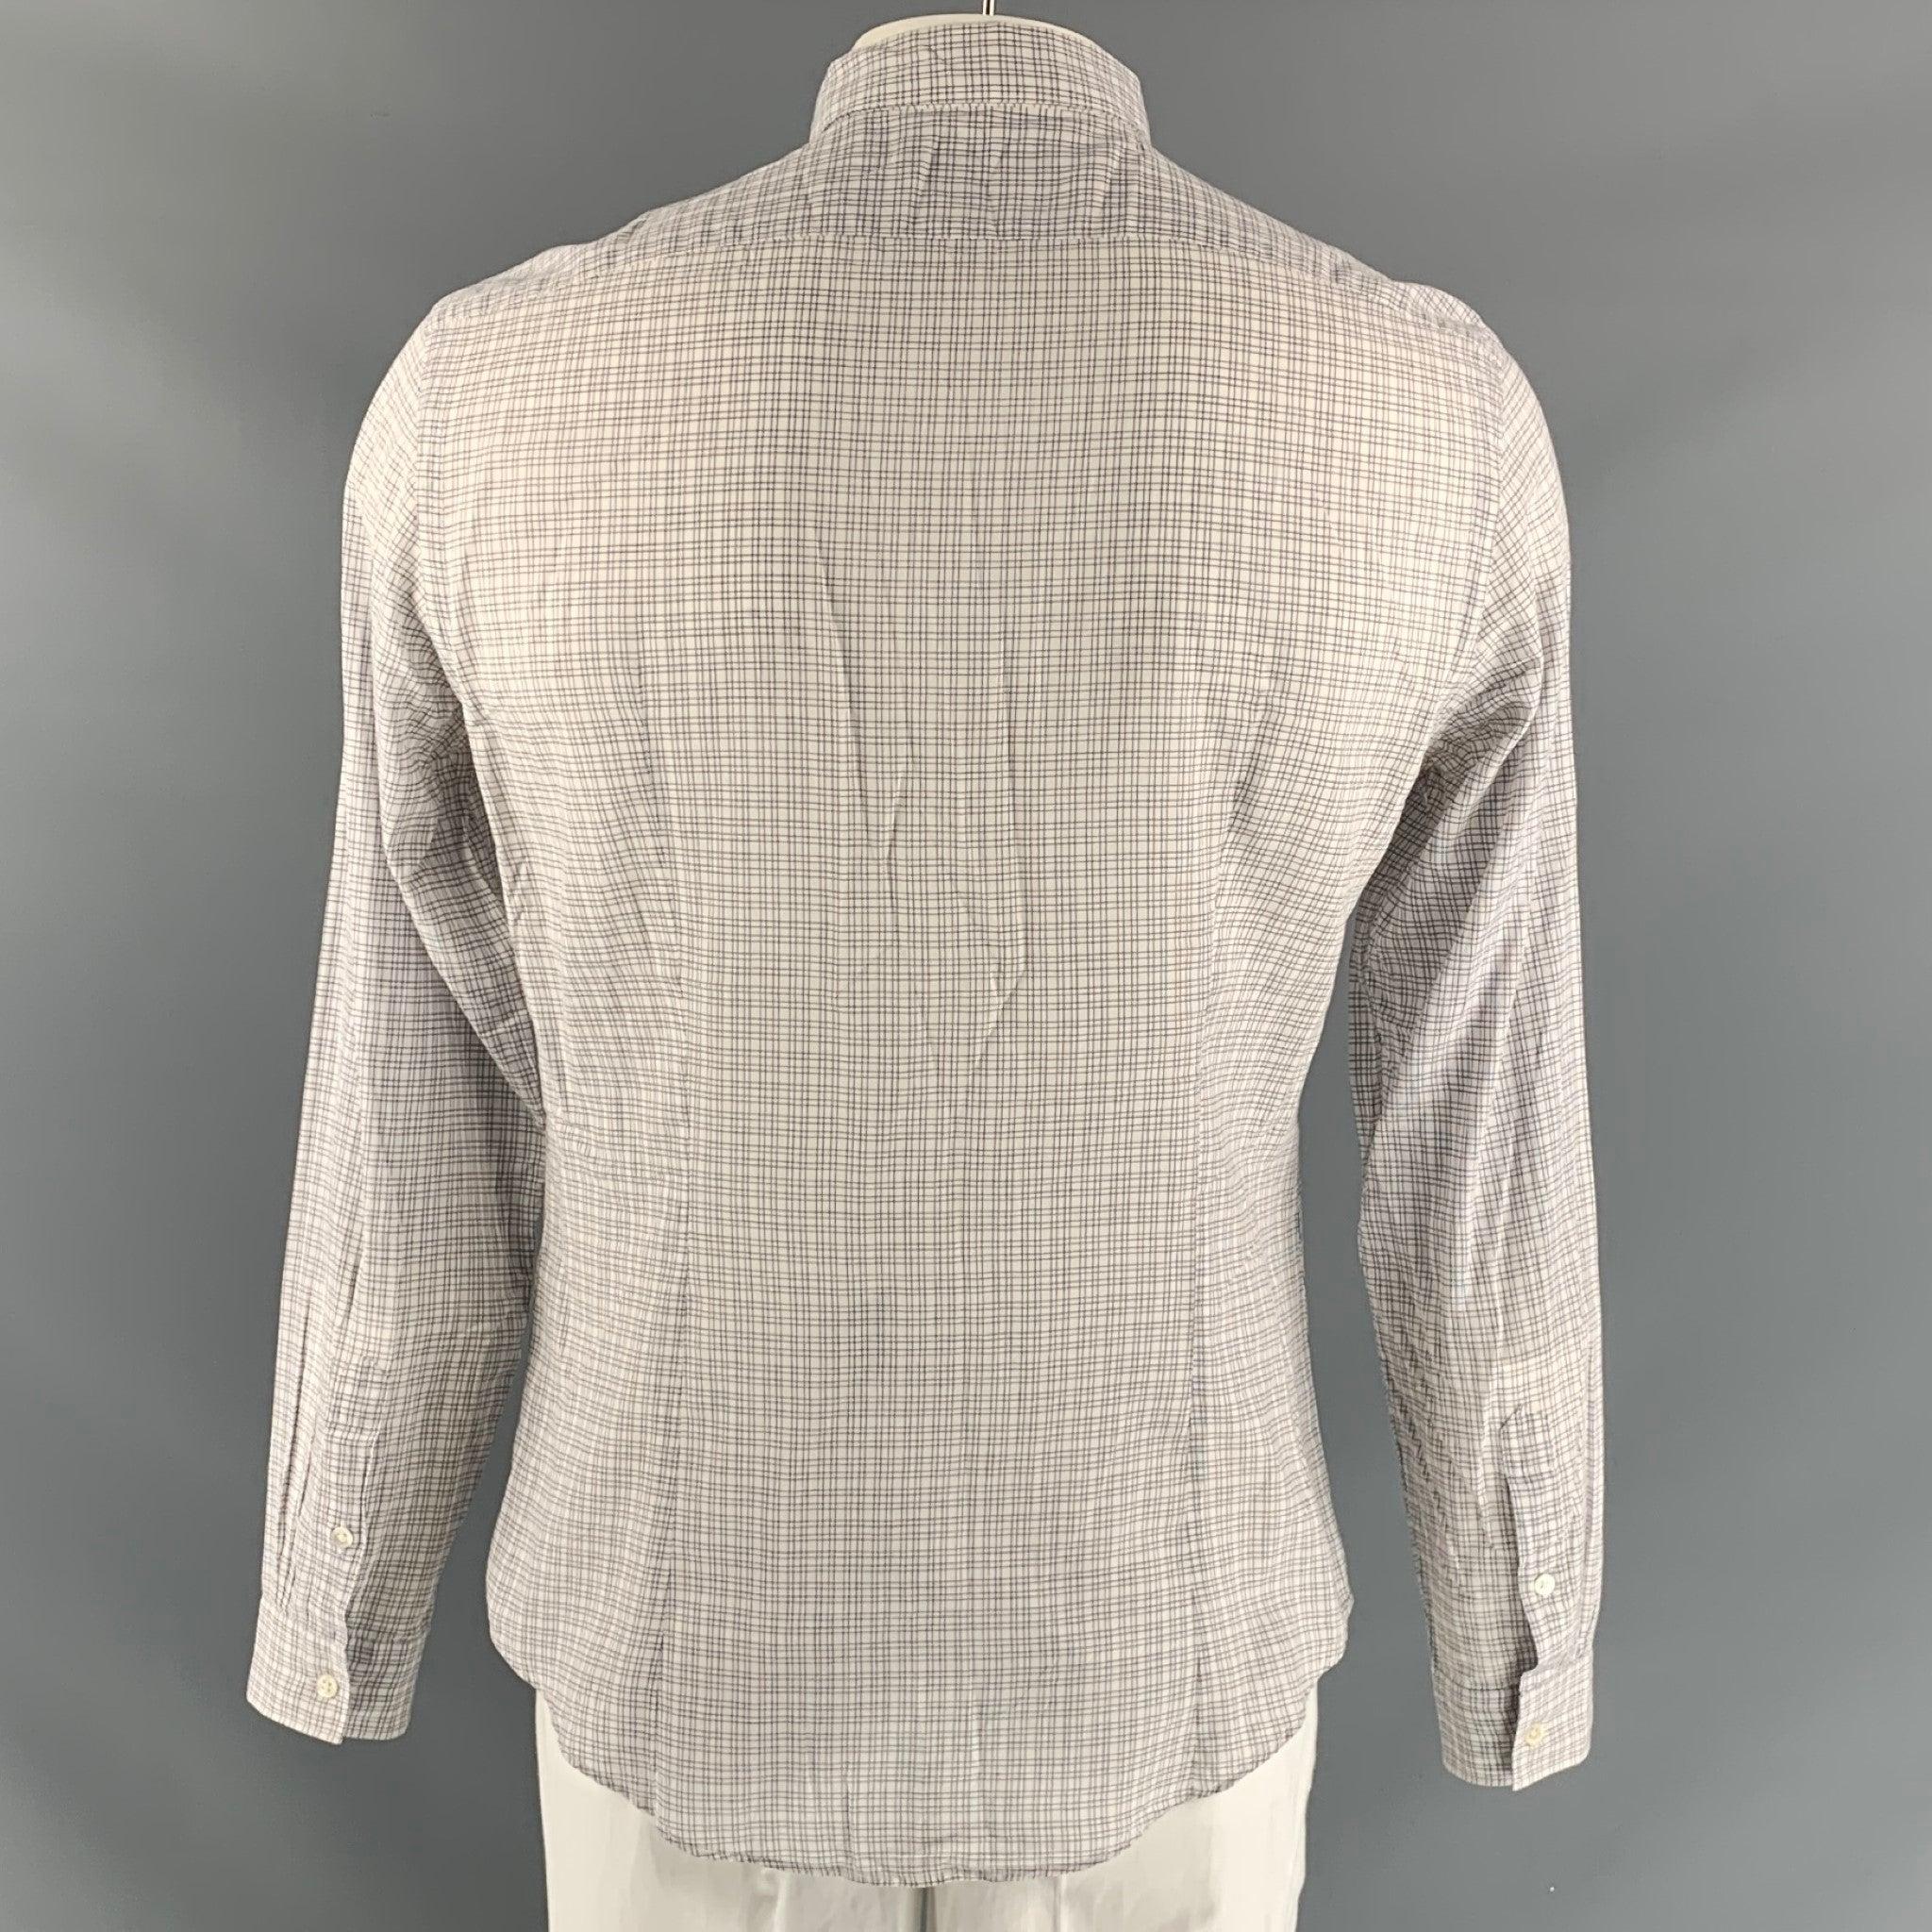 JOHN VARVATOS Size M White Checkered Cotton Button Up Long Sleeve Shirt In Excellent Condition For Sale In San Francisco, CA